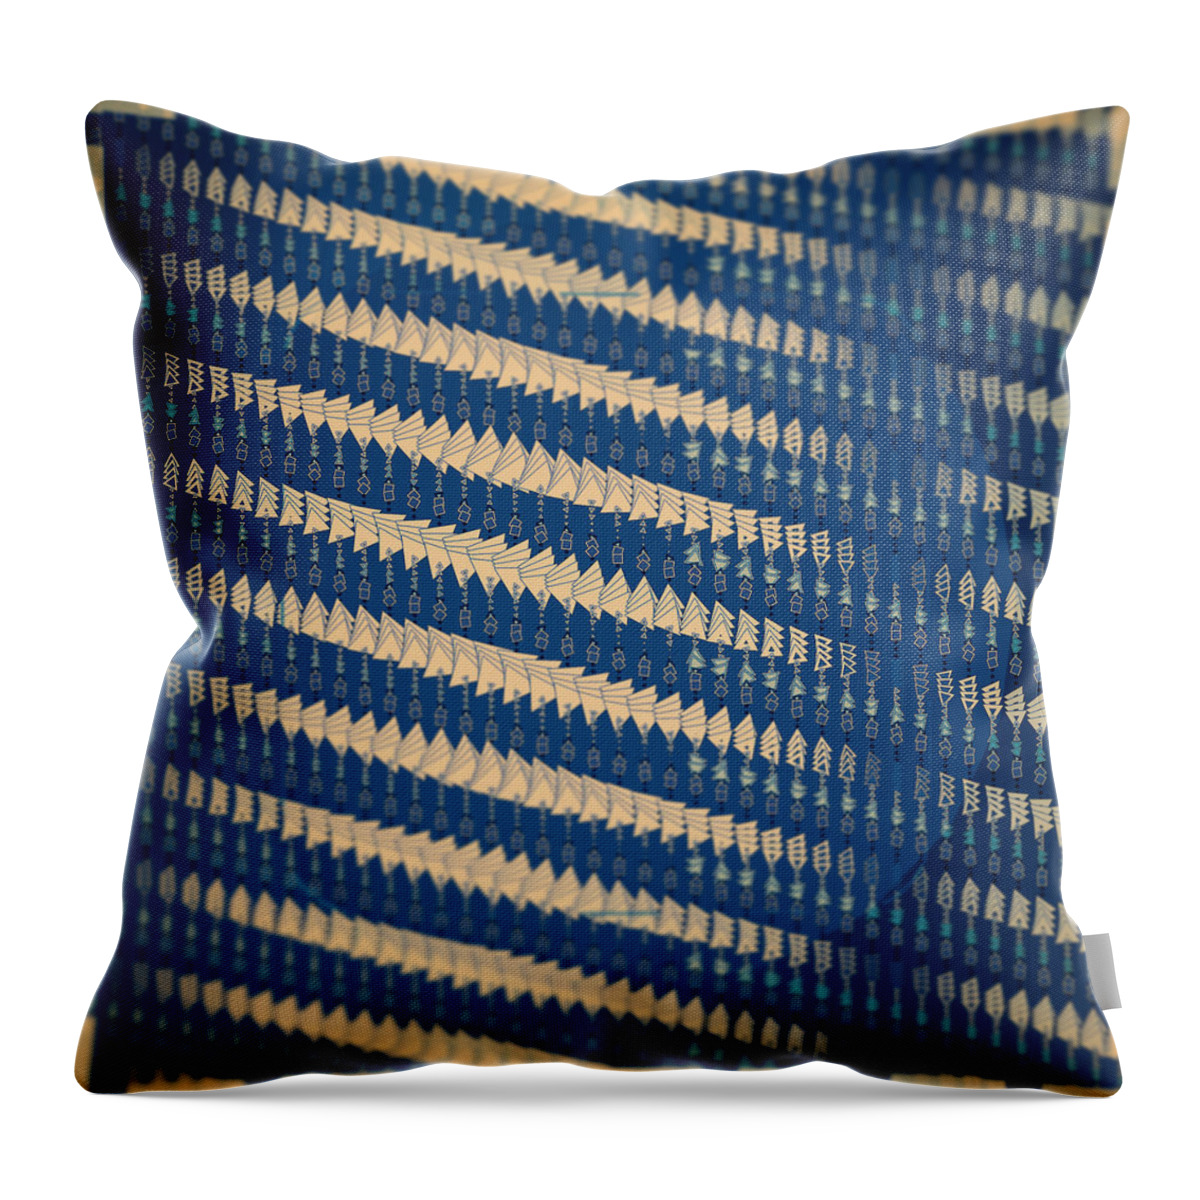 Abstract Throw Pillow featuring the digital art Pattern 37 by Marko Sabotin